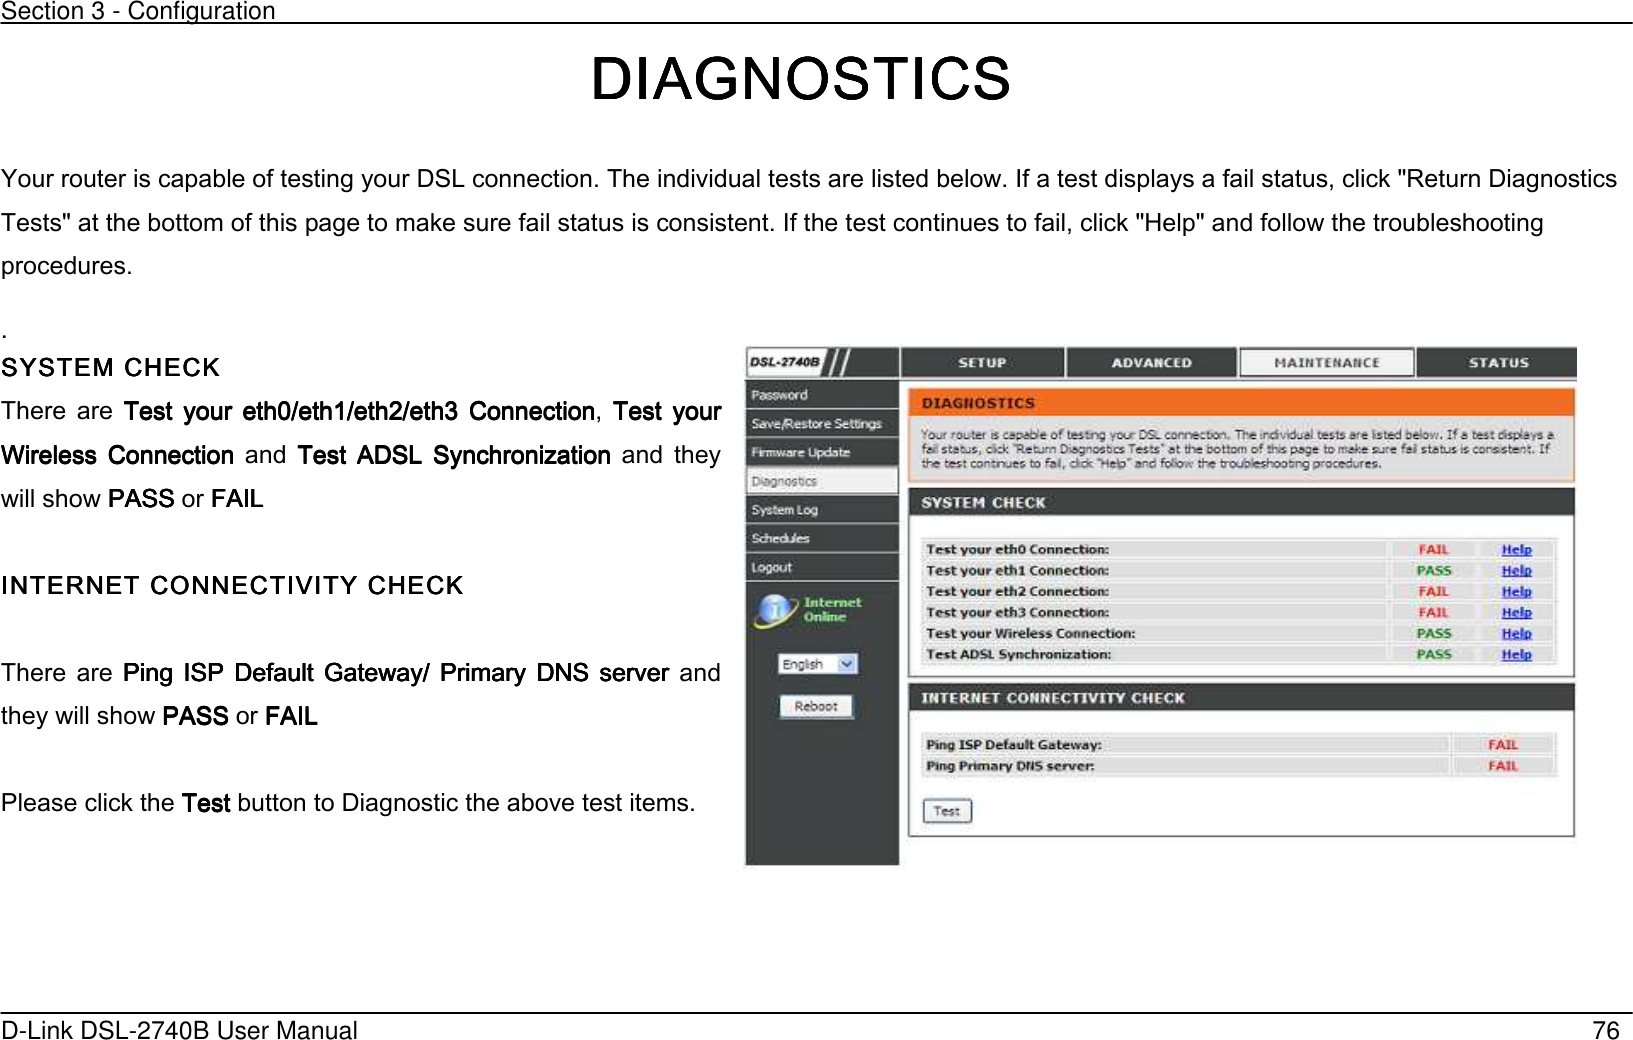 Section 3 - Configuration   D-Link DSL-2740B User Manual                                                  76 DIAGNOSTICSDIAGNOSTICSDIAGNOSTICSDIAGNOSTICS Your router is capable of testing your DSL connection. The individual tests are listed below. If a test displays a fail status, click &quot;Return Diagnostics Tests&quot; at the bottom of this page to make sure fail status is consistent. If the test continues to fail, click &quot;Help&quot; and follow the troubleshooting procedures. . SYSTEM CHECKSYSTEM CHECKSYSTEM CHECKSYSTEM CHECK     There  are  Test  your  eth0/eth1/eth2/eth3  ConnectionTest  your  eth0/eth1/eth2/eth3  ConnectionTest  your  eth0/eth1/eth2/eth3  ConnectionTest  your  eth0/eth1/eth2/eth3  Connection,  Test  yourTest  yourTest  yourTest  your Wireless  Connection Wireless  Connection Wireless  Connection Wireless  Connection  and  Test  ADSL  SynchronizationTest  ADSL  SynchronizationTest  ADSL  SynchronizationTest  ADSL  Synchronization  and  they will show PASSPASSPASSPASS or FAILFAILFAILFAIL        INTERNET CONNECTIVITINTERNET CONNECTIVITINTERNET CONNECTIVITINTERNET CONNECTIVITYYYY CHECK CHECK CHECK CHECK        There  are  Ping  ISP  Default  Gateway/  Primary  DNS  server Ping  ISP  Default  Gateway/  Primary  DNS  server Ping  ISP  Default  Gateway/  Primary  DNS  server Ping  ISP  Default  Gateway/  Primary  DNS  server  and they will show PASSPASSPASSPASS or FAILFAILFAILFAIL     Please click the TestTestTestTest button to Diagnostic the above test items.  